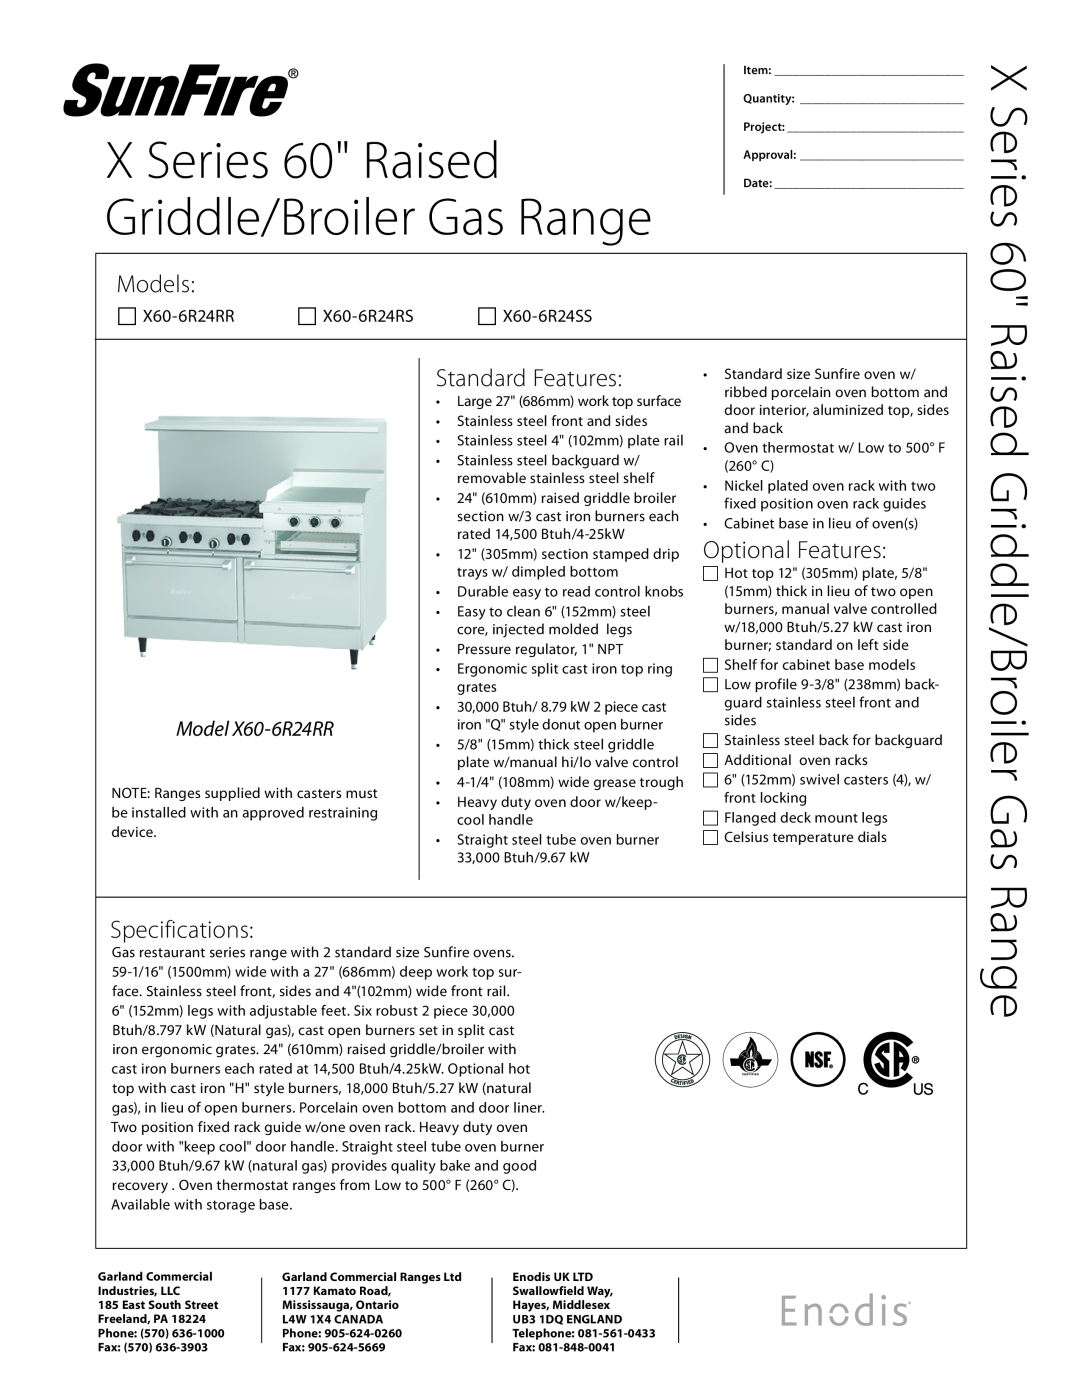 Garland X60-6R24SS specifications X Series 60 Raised, Griddle/Broiler Gas Range, Raised Griddle/Broiler Gas 